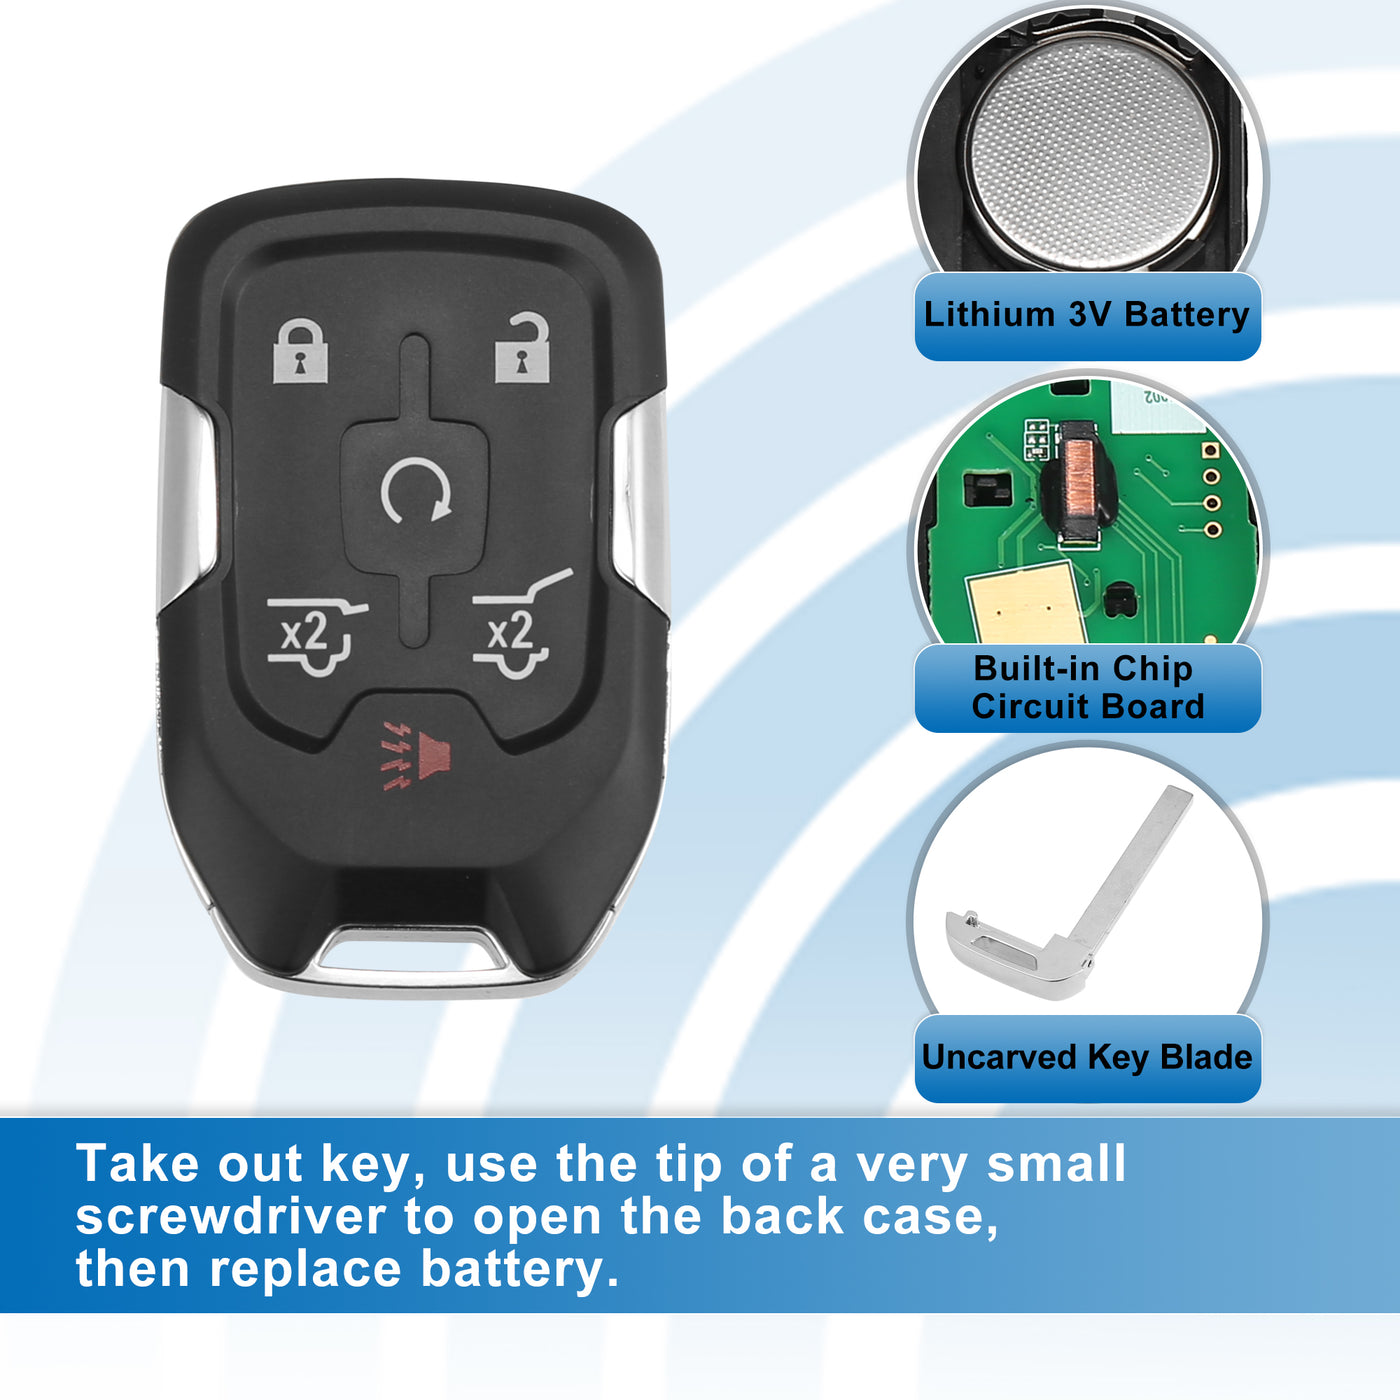 X AUTOHAUX 6 Button Car Keyless Entry Remote Control Replacement Key Fob Proximity Smart Fob HYQ1AA for GMC Yukon 2015-2020 315MHz